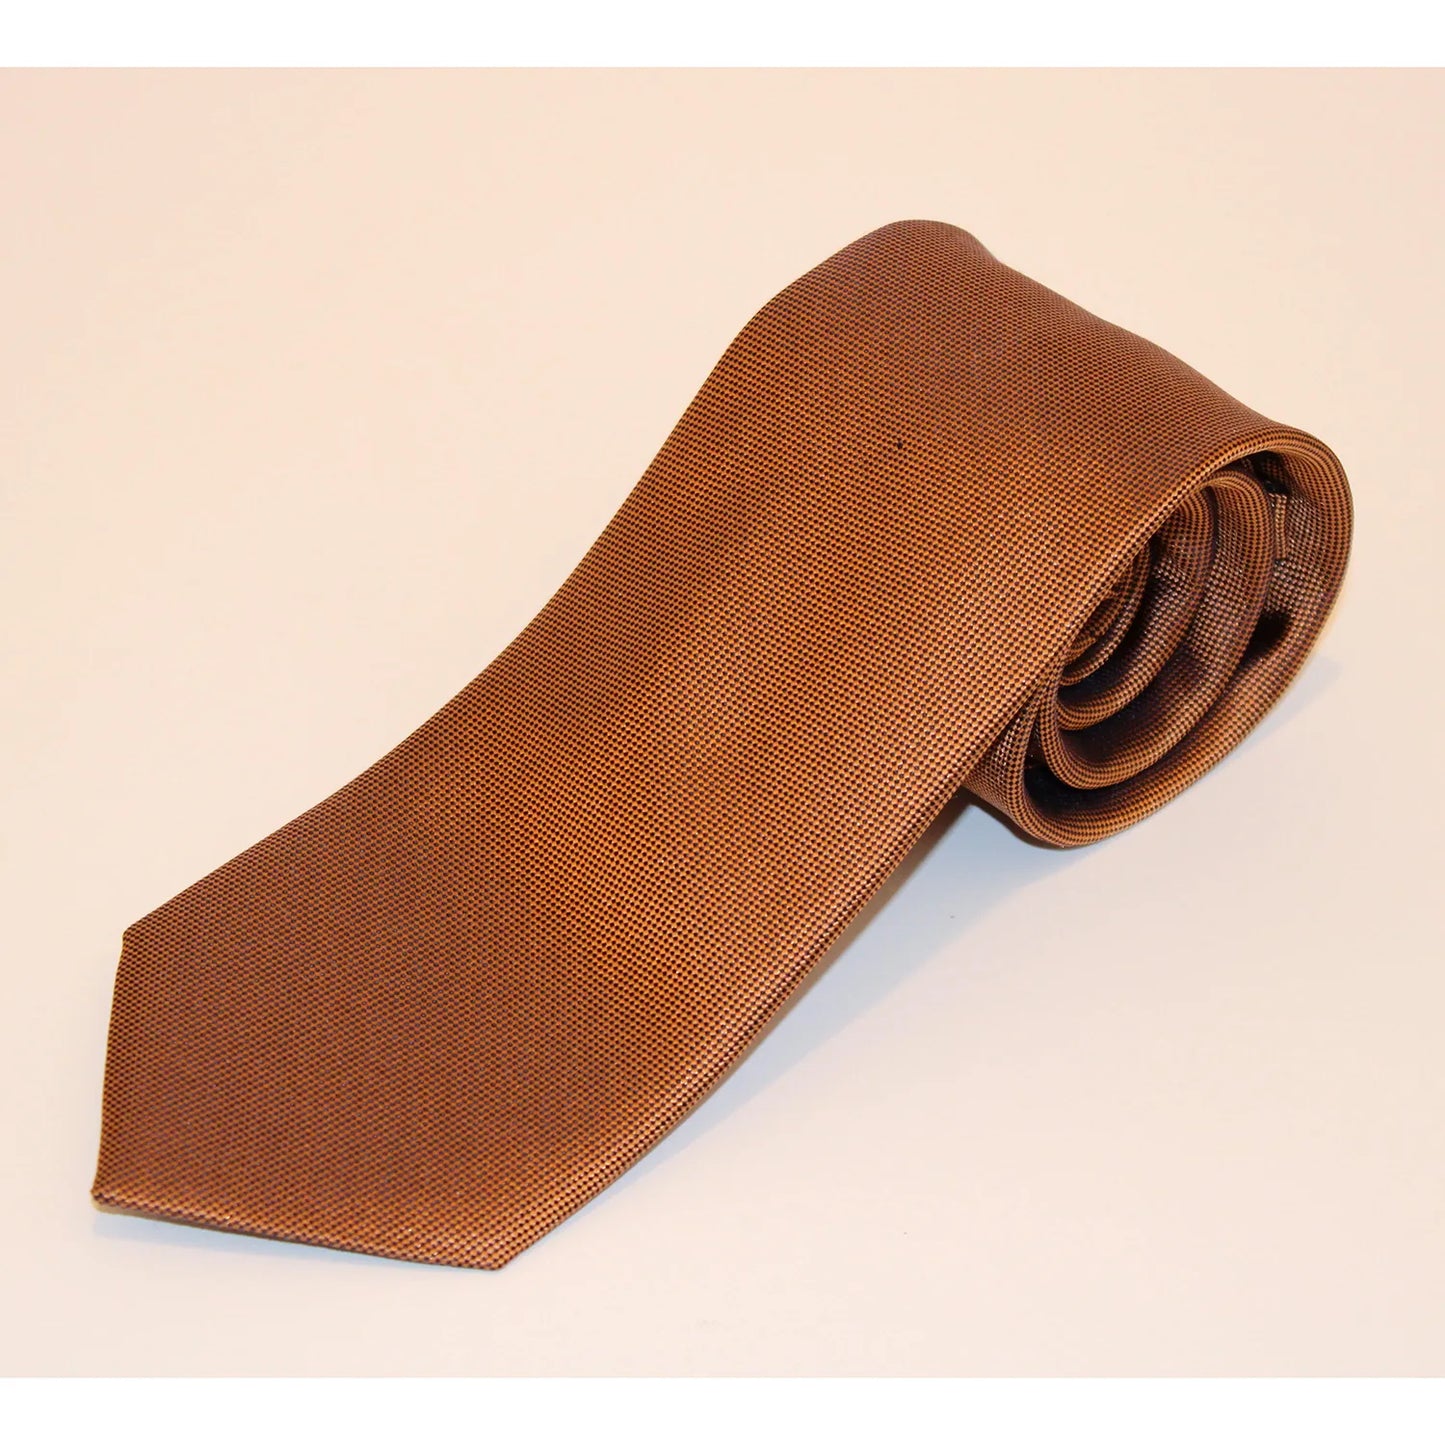 The Shirt Shop Tall Tie - Solid Brown